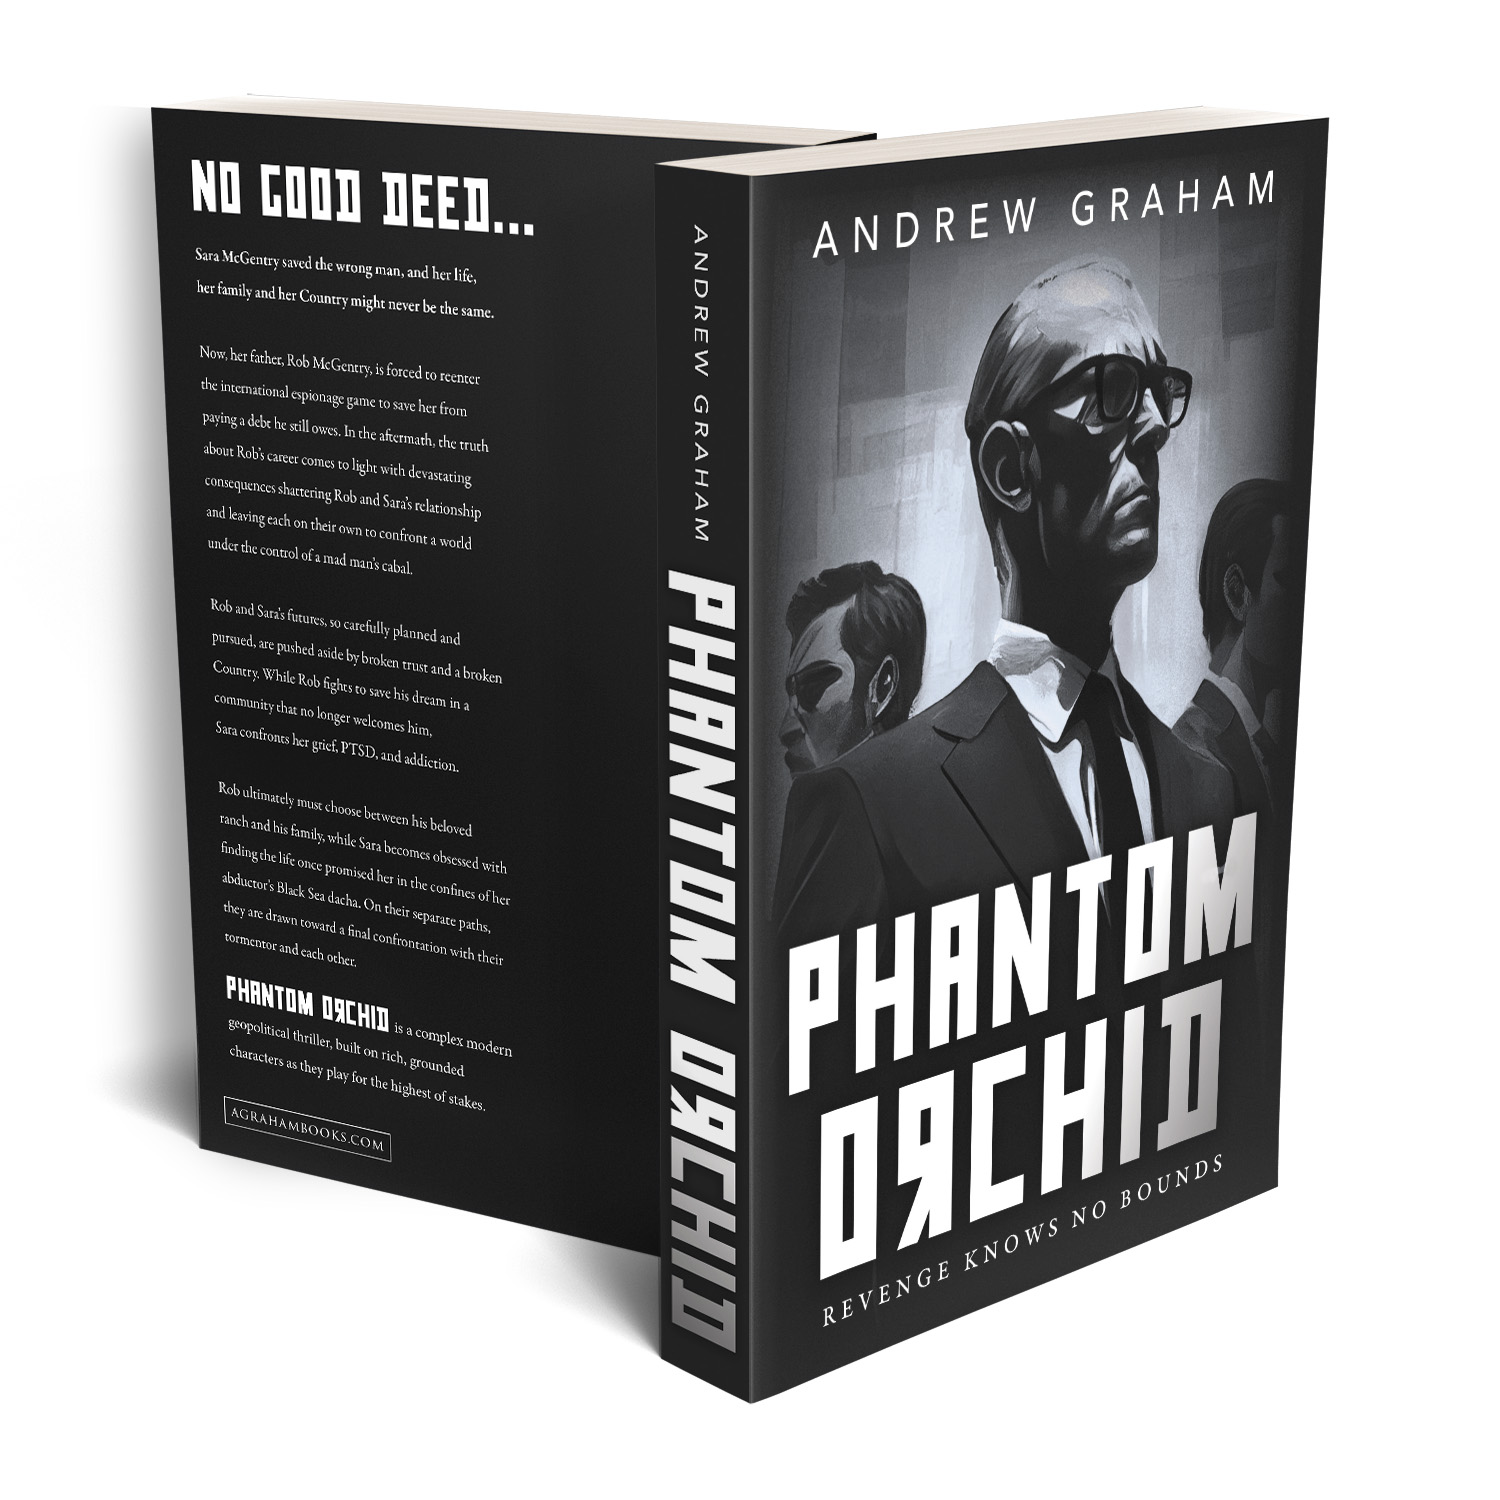 'Phantom Orchid' is a dark and twisting geopolitical thriller, featuring rich characters playing for the highest of stakes. The author is Andrew Graham. The book cover design is by Mark Thomas. To learn more about what Mark could do for your book, please visit coverness.com.